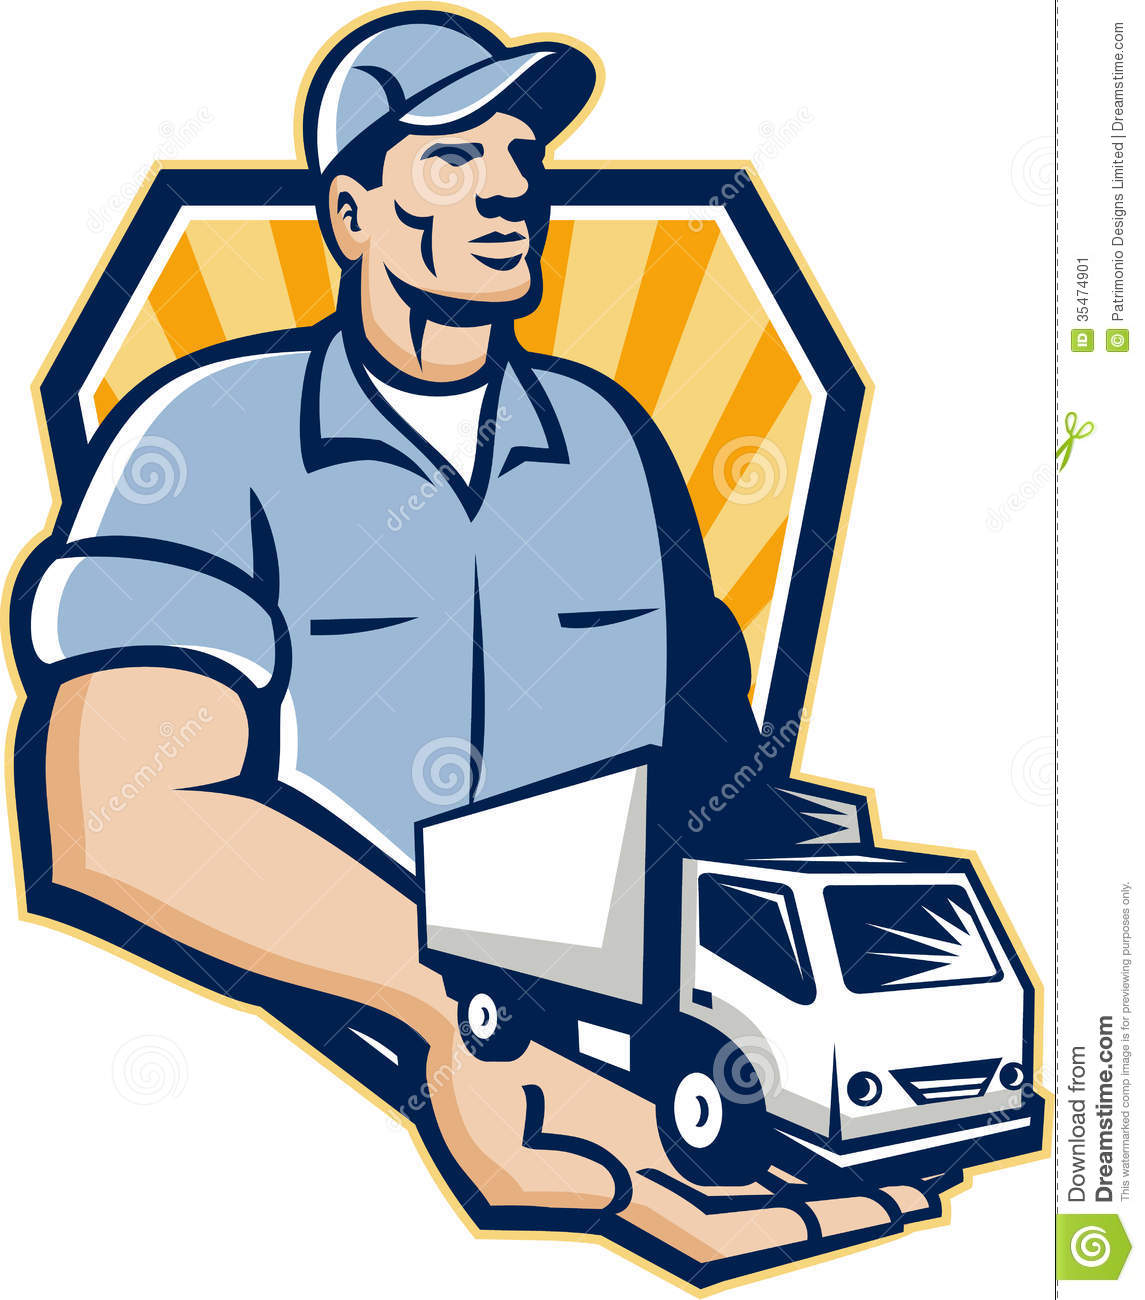 Illustration Of A Removal Man Delivery Guy With Moving Truck Van On